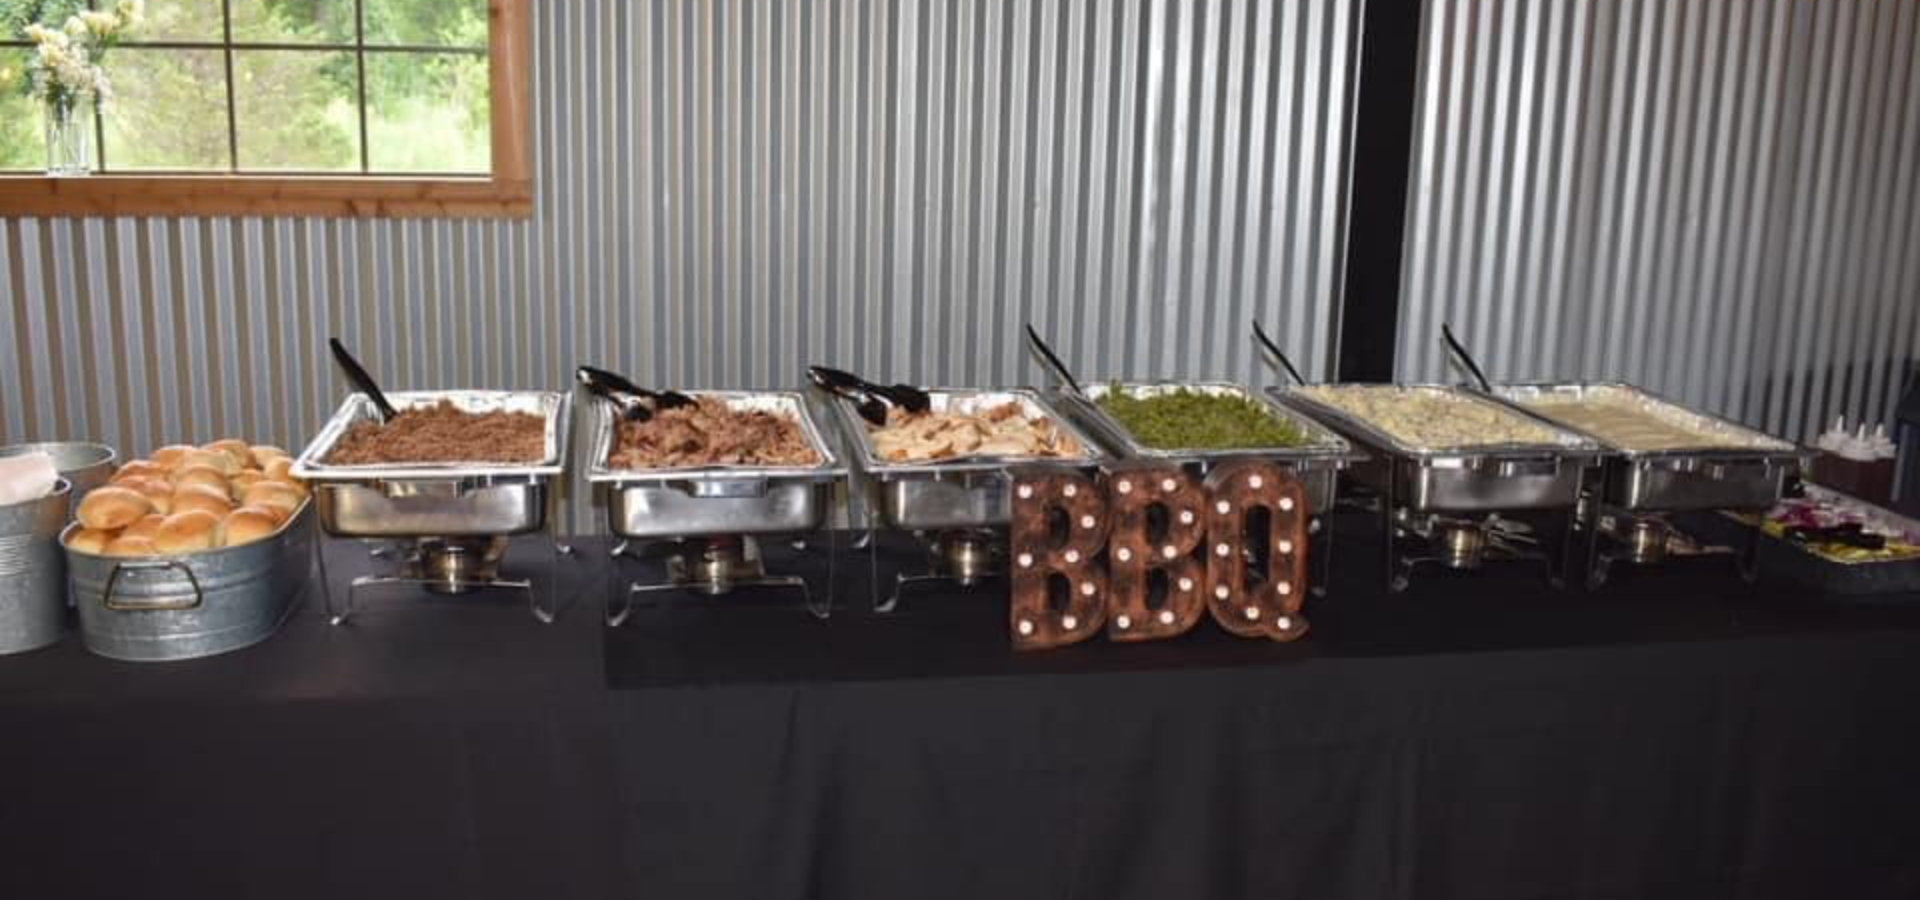 Catering Photos